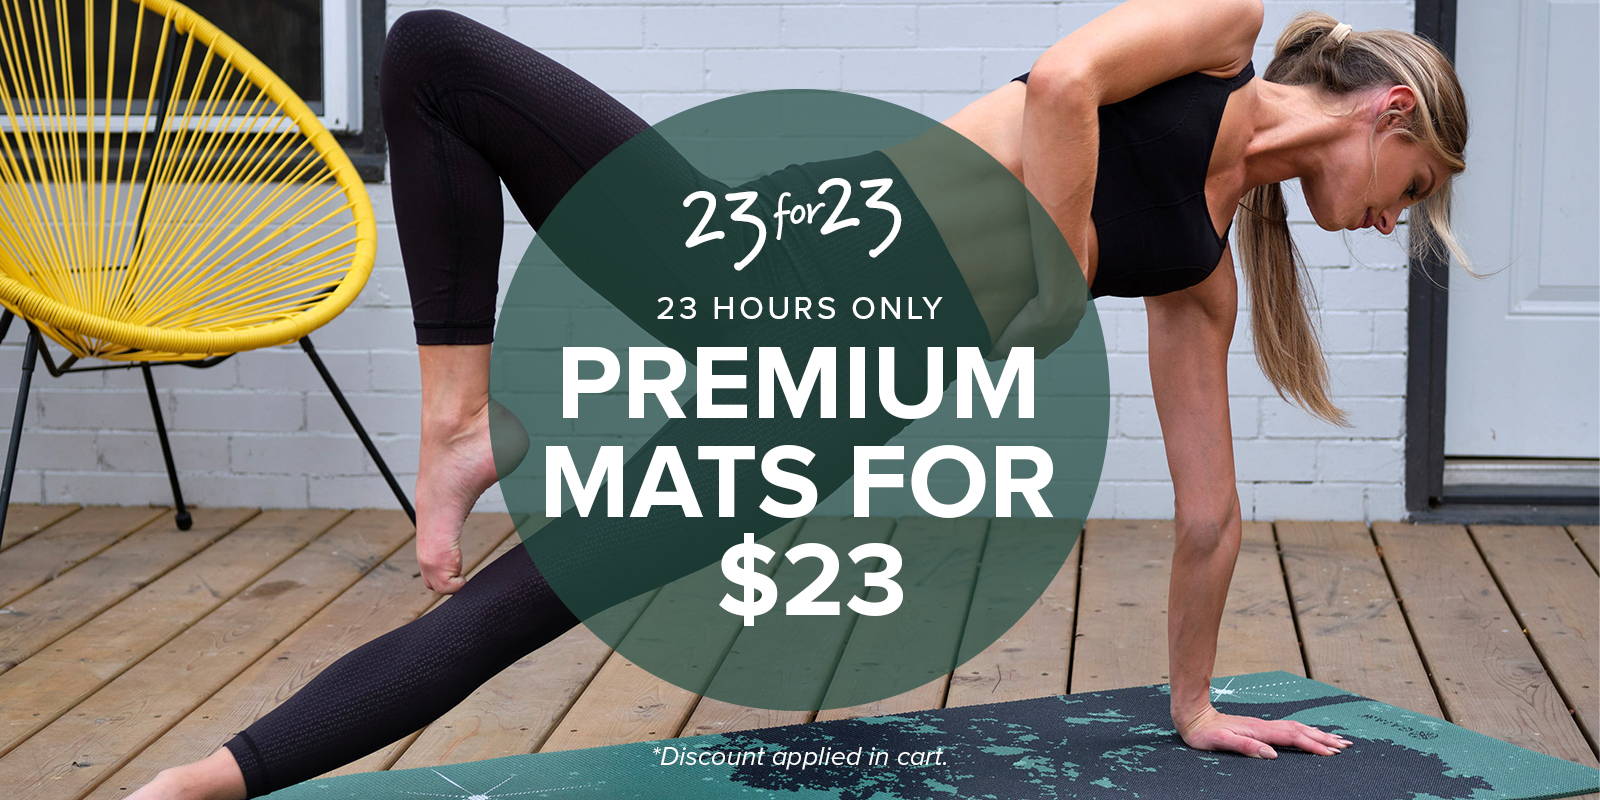 $23 Premium Mats for 23 Hours